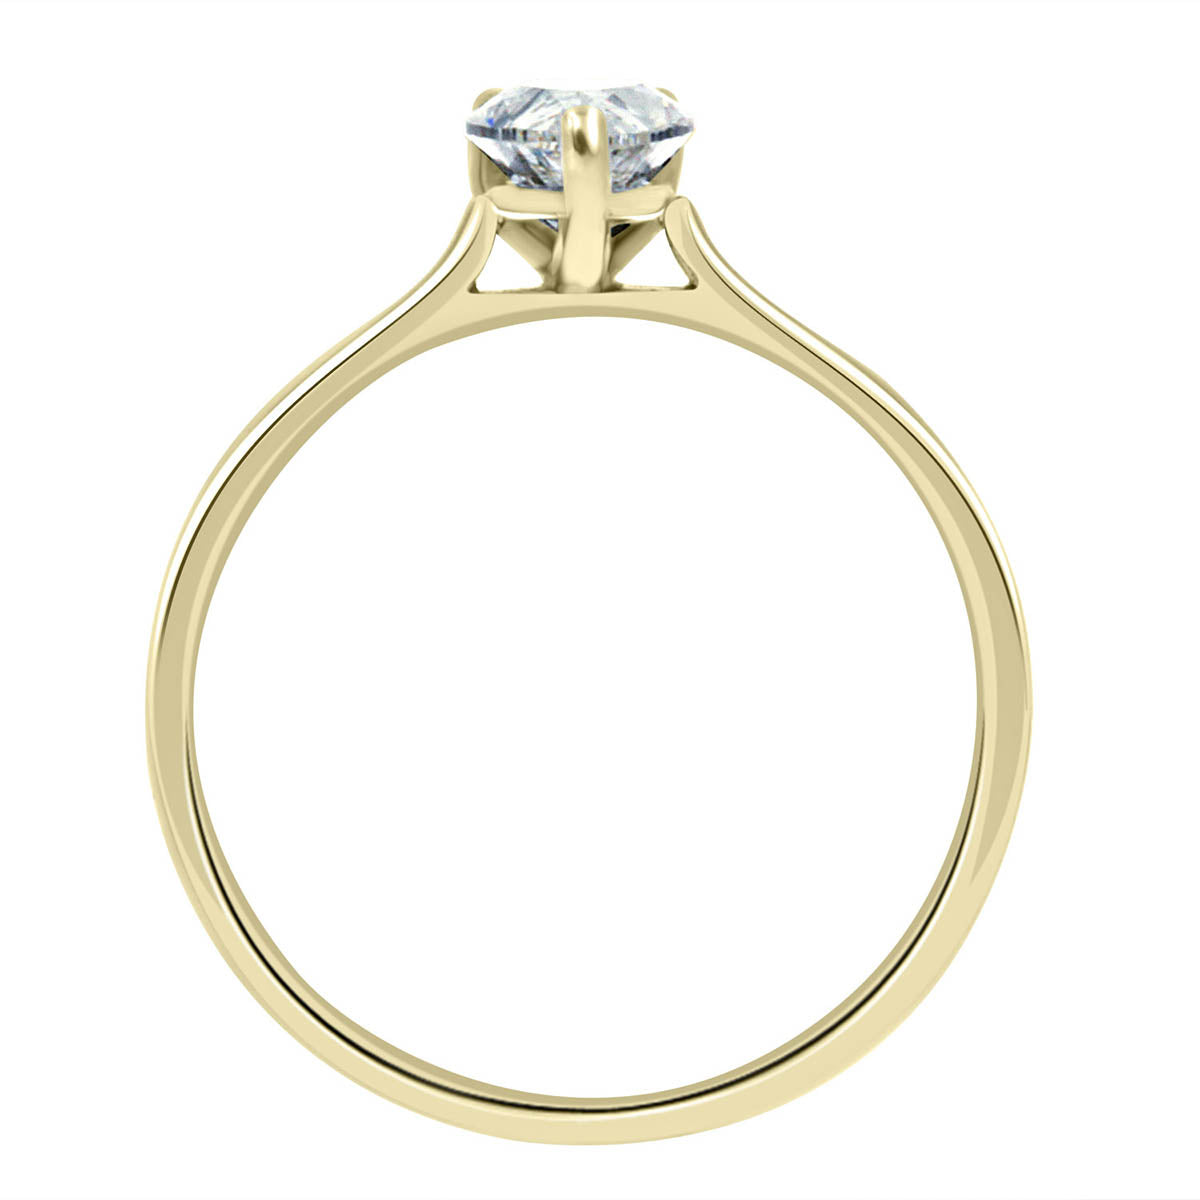 Pear Cut Solitaire Engagement Ring made from yellow gold pictured upright